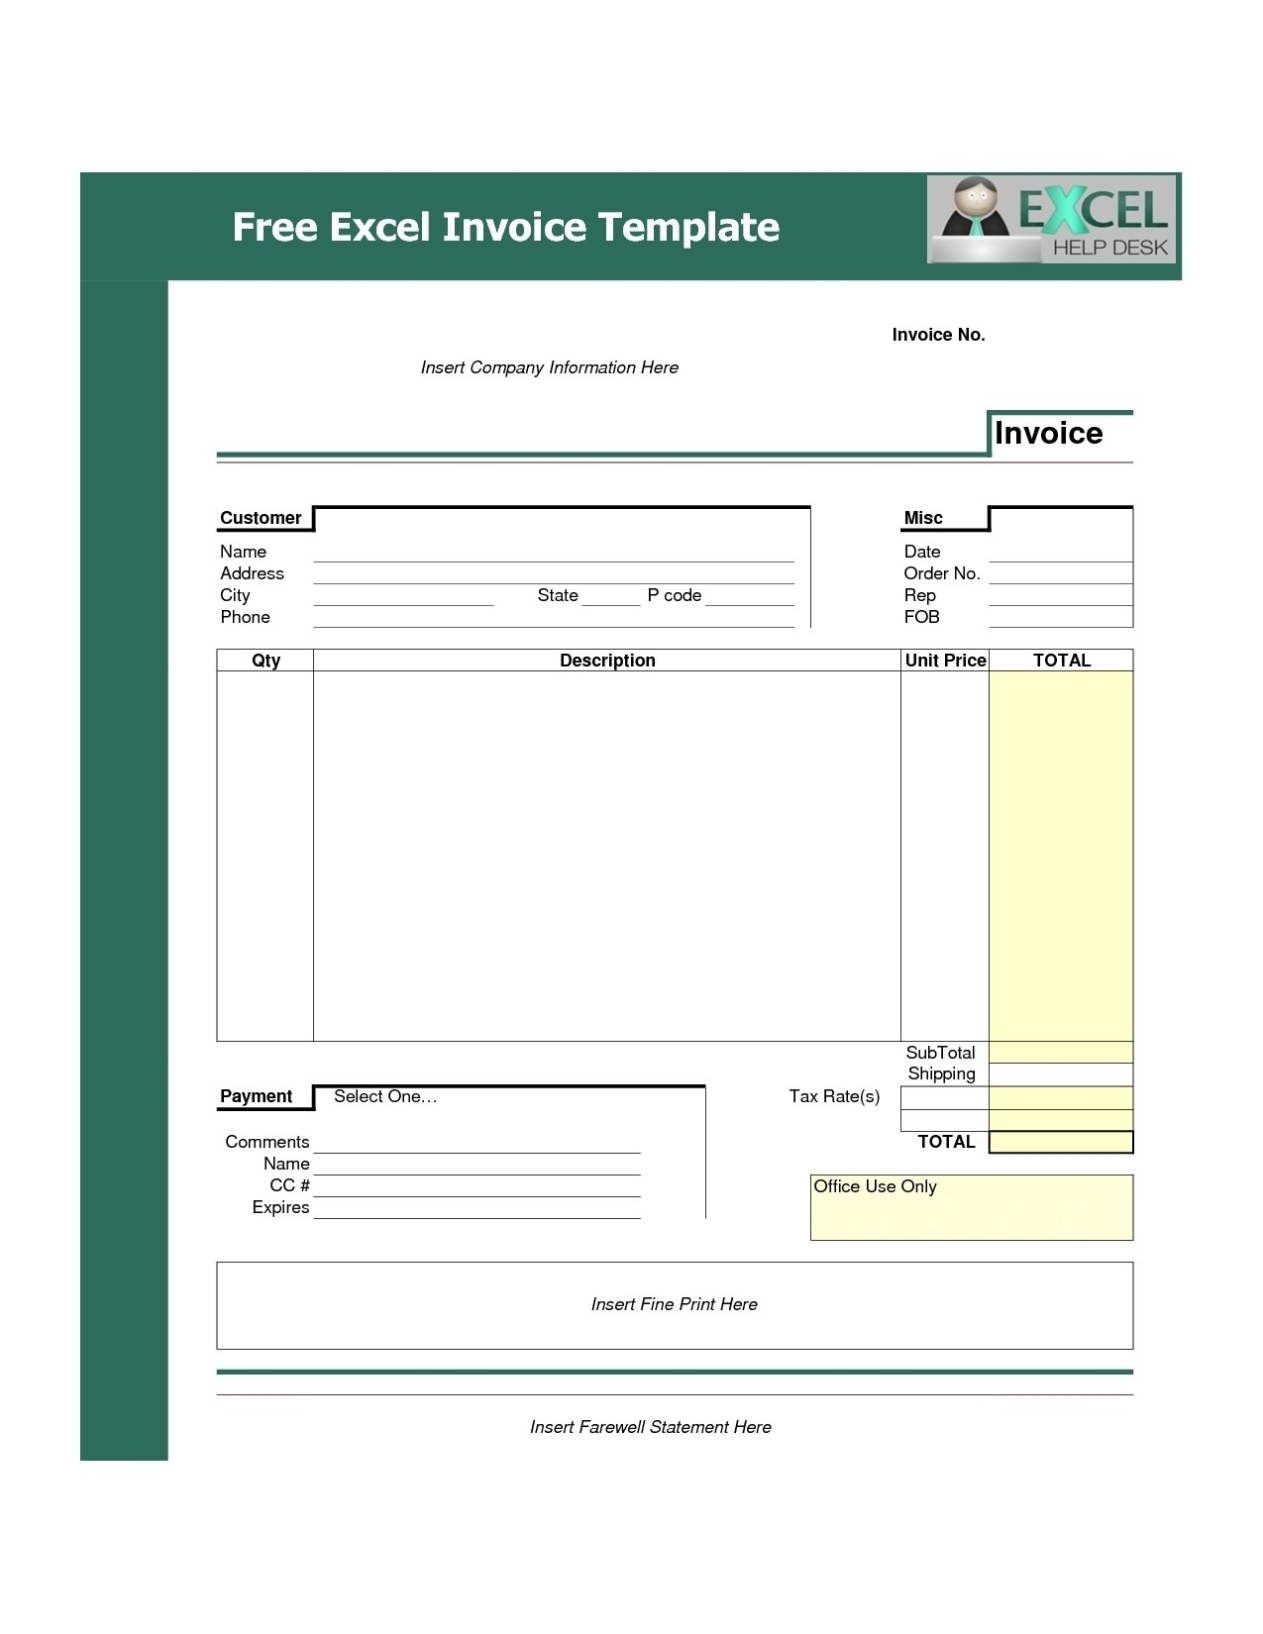 Contoh Download Invoice Template Libreoffice 2022 - Medical Record With Regard To Libreoffice Invoice Template